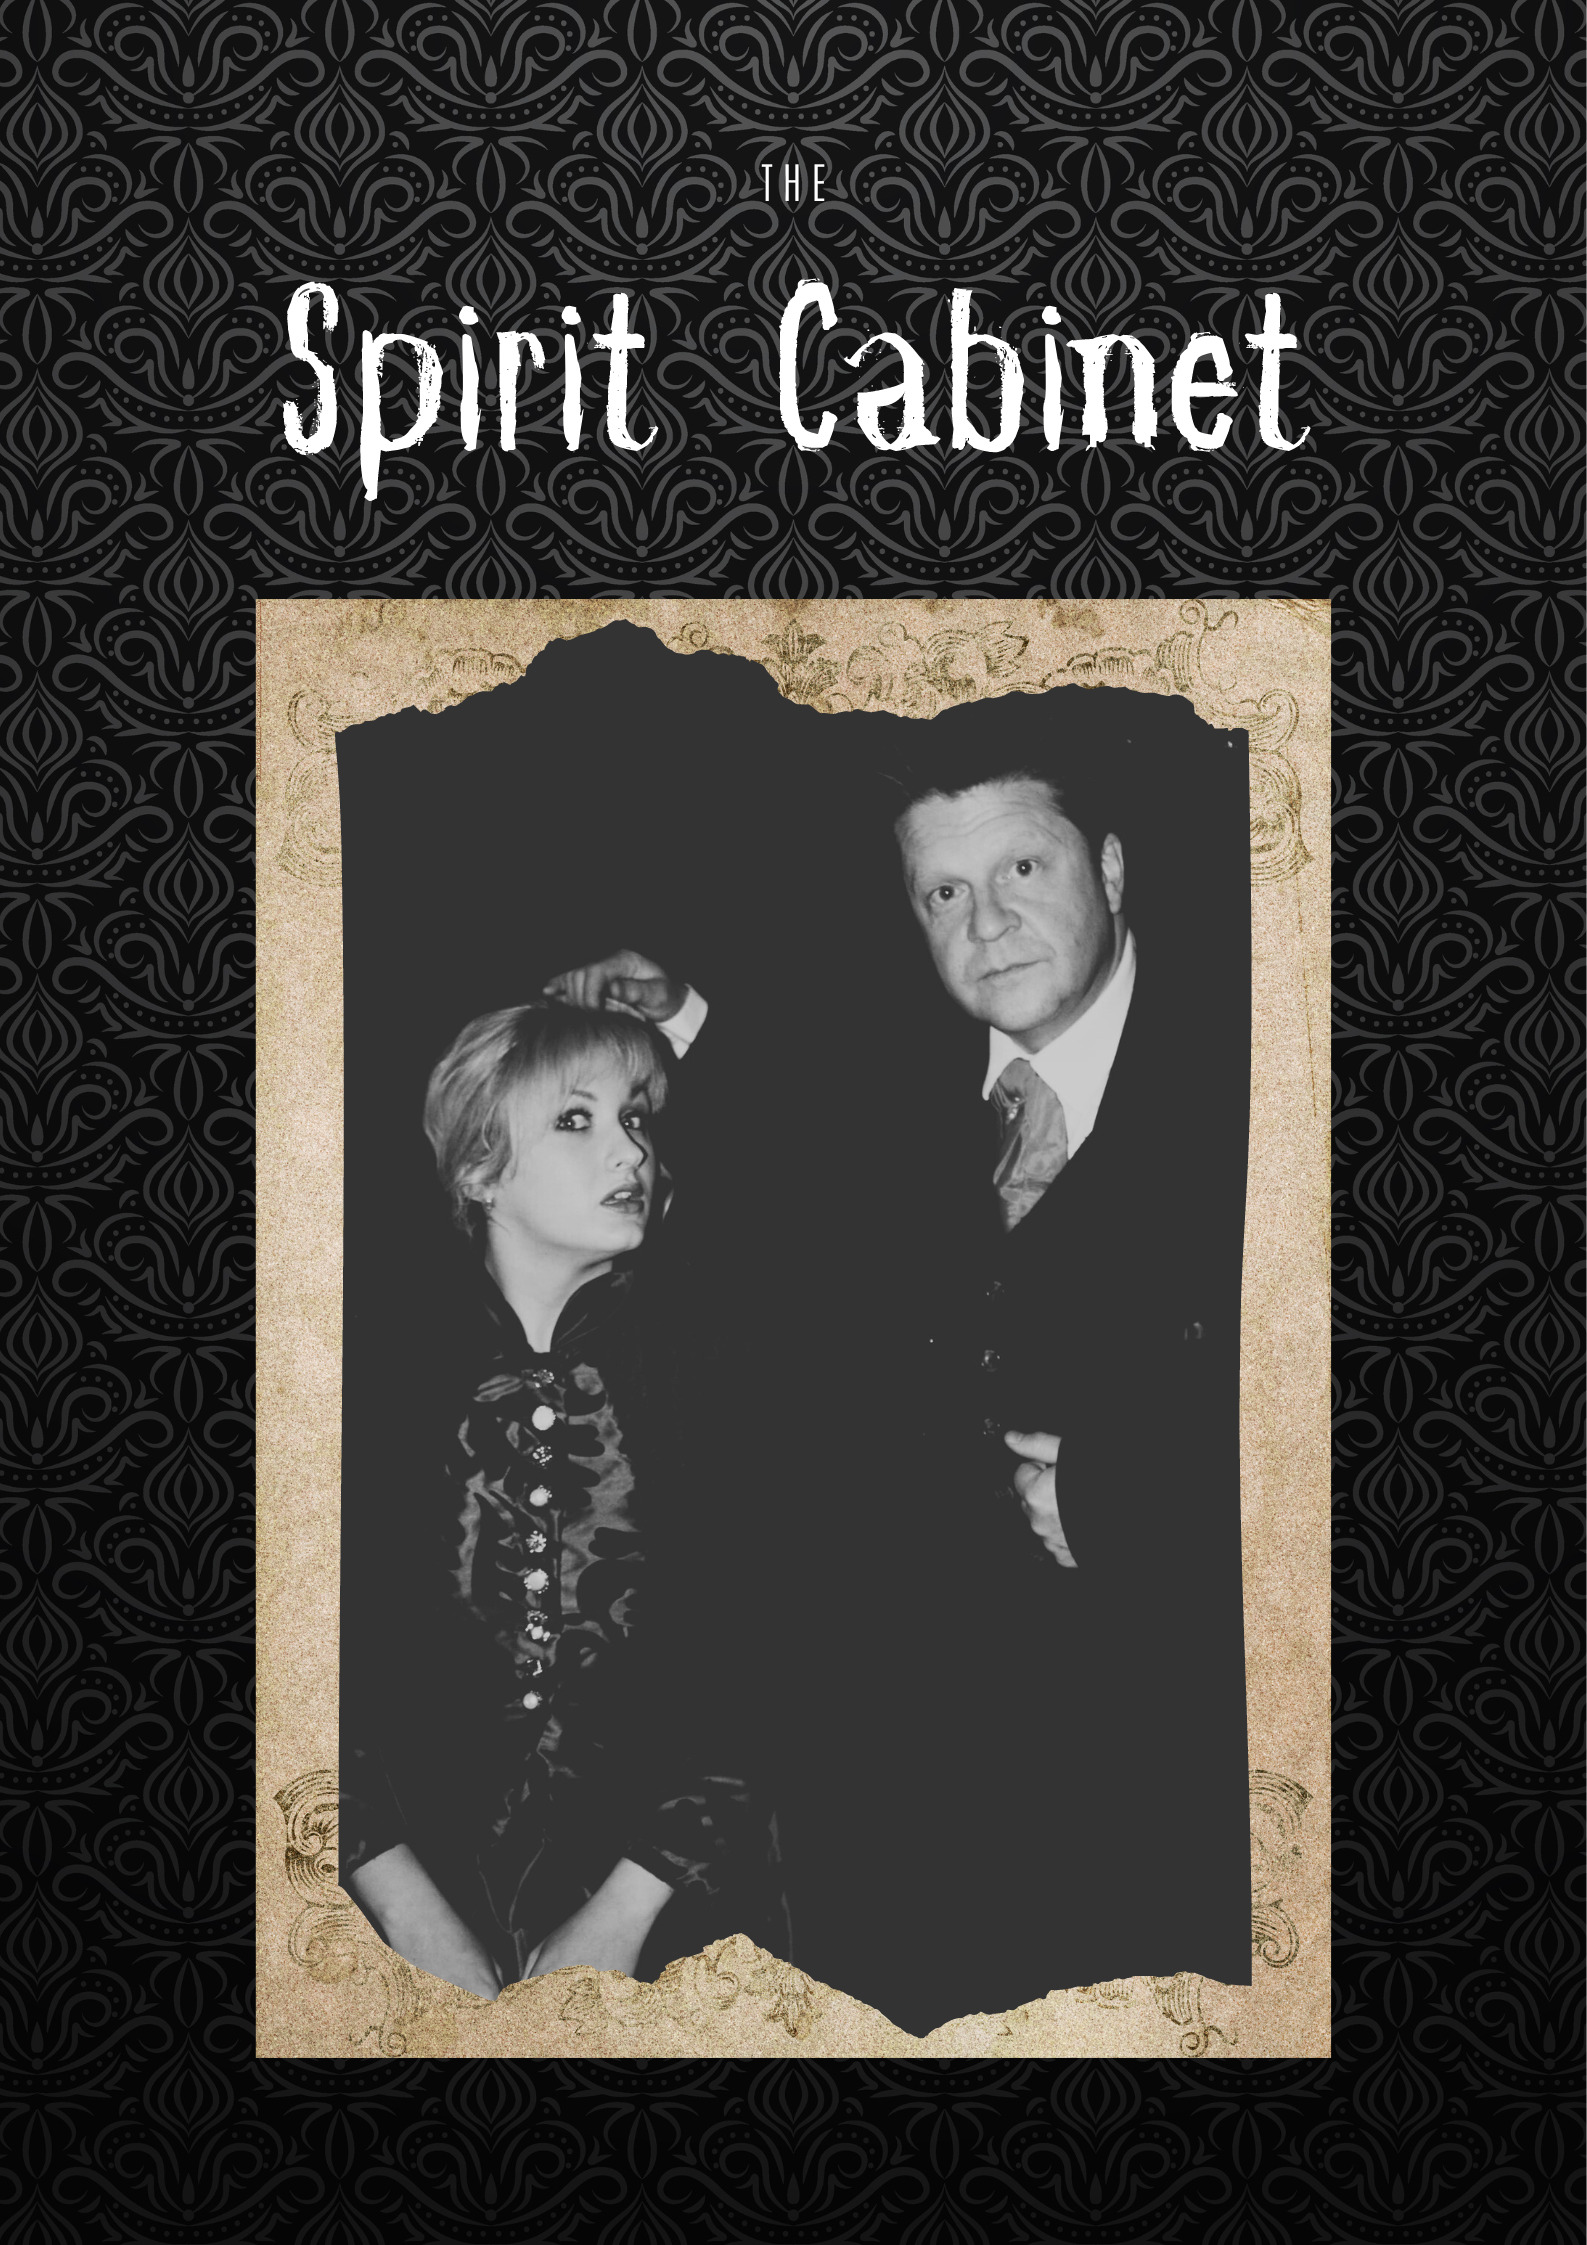 Image of two people in a black and white photograph with 'Spirit Cabinet' written in white font over the top